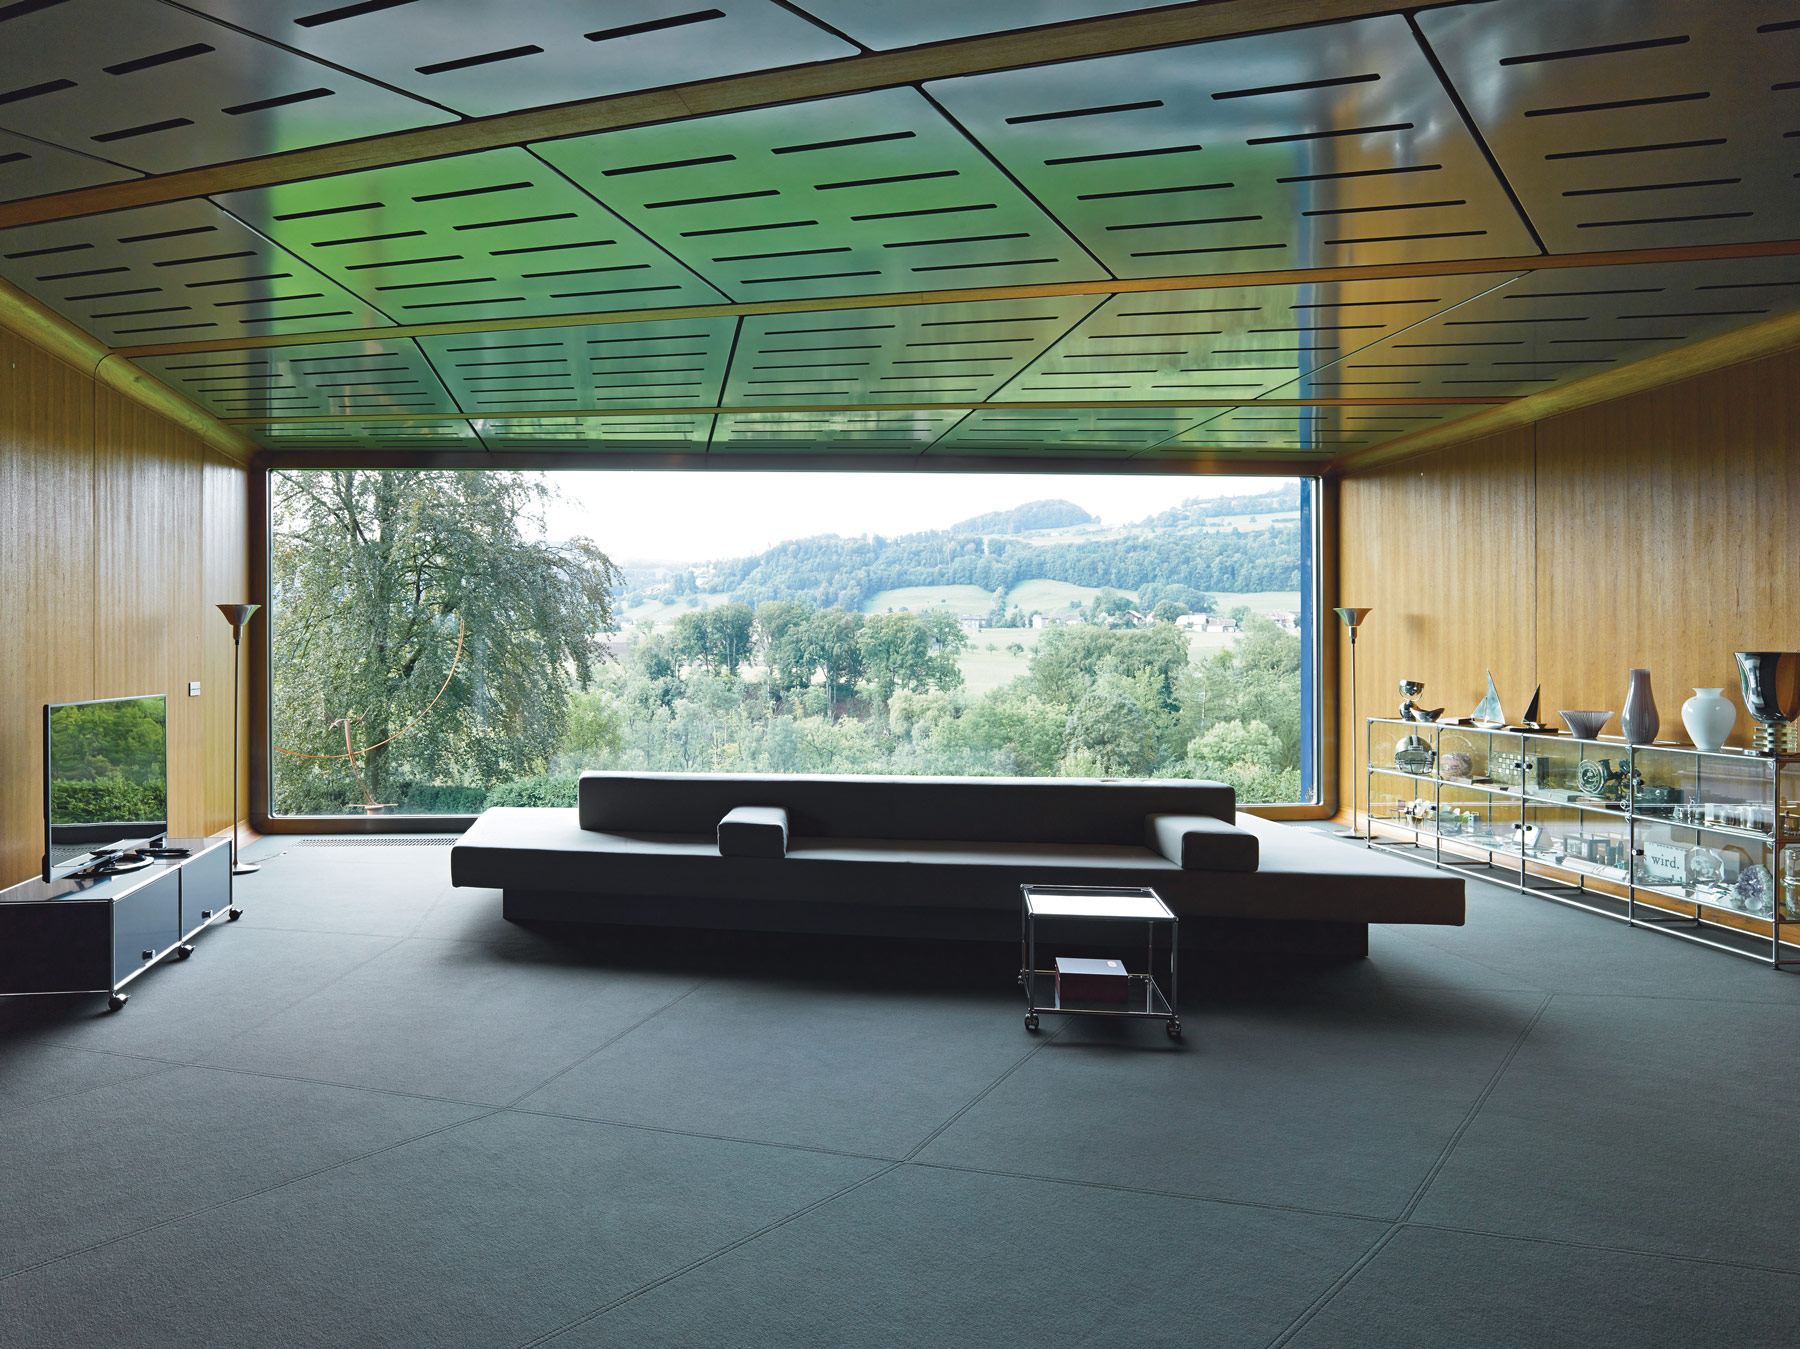 A sofa designed by architect Ali Tayar dominates a carbon fiber-framed living room in Bern, Switzerland. One side of the sofa is meant for reclining; the other for sitting. the rest of the furniture is from USM Haller Systems. (Courtesy Simon B. Opladen)